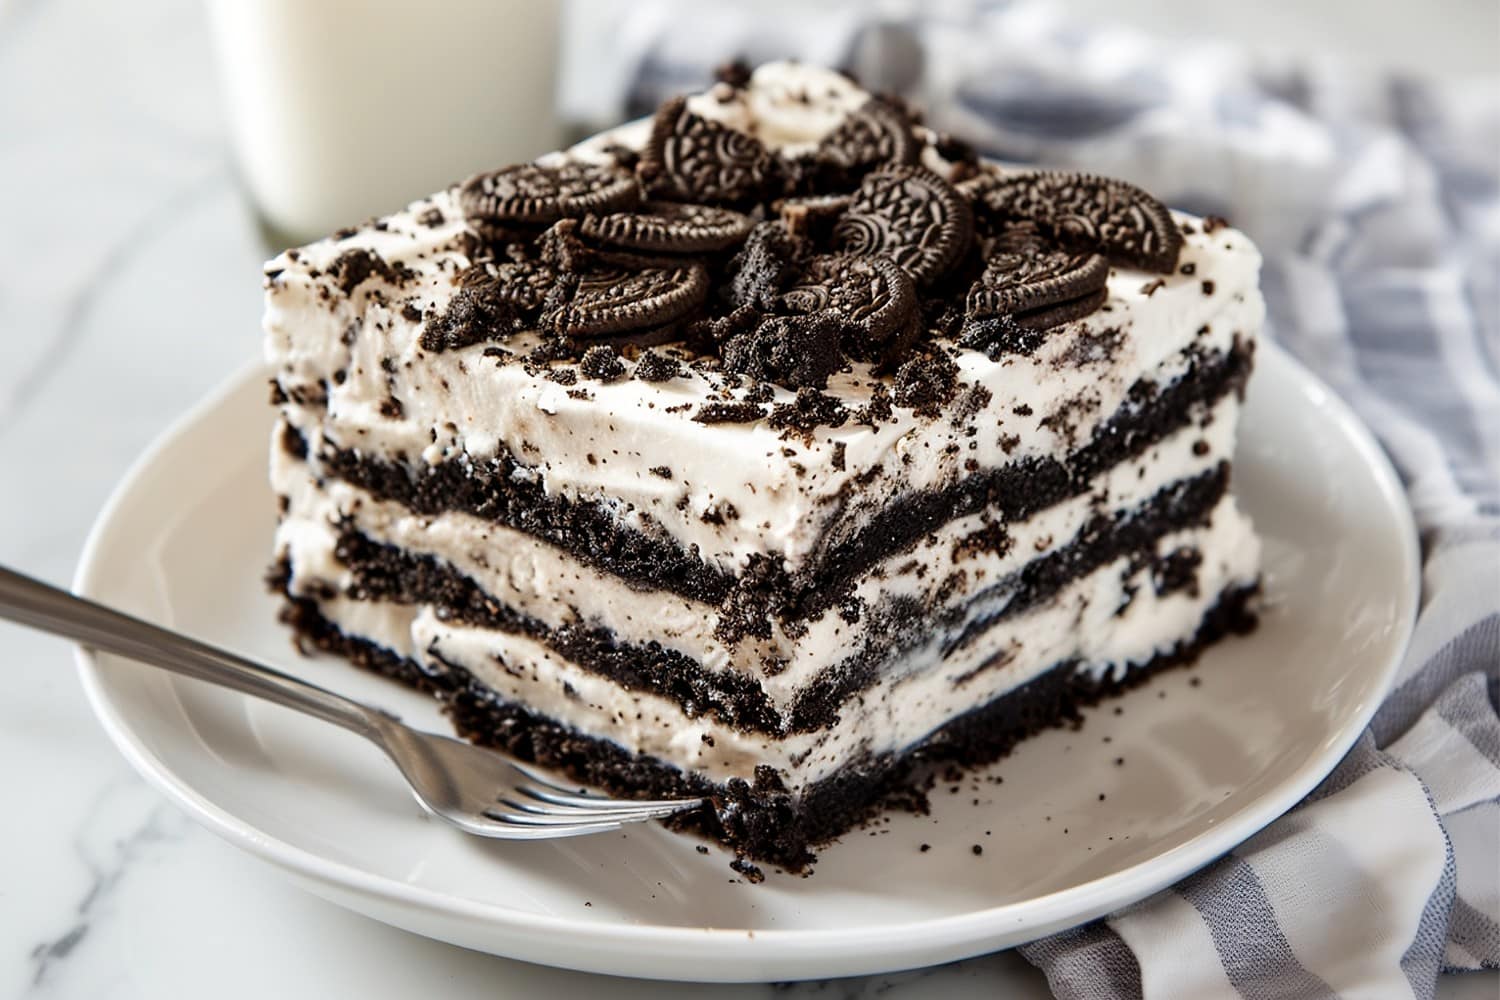 Oreo icebox cake topped with crushed cookies, served with milk